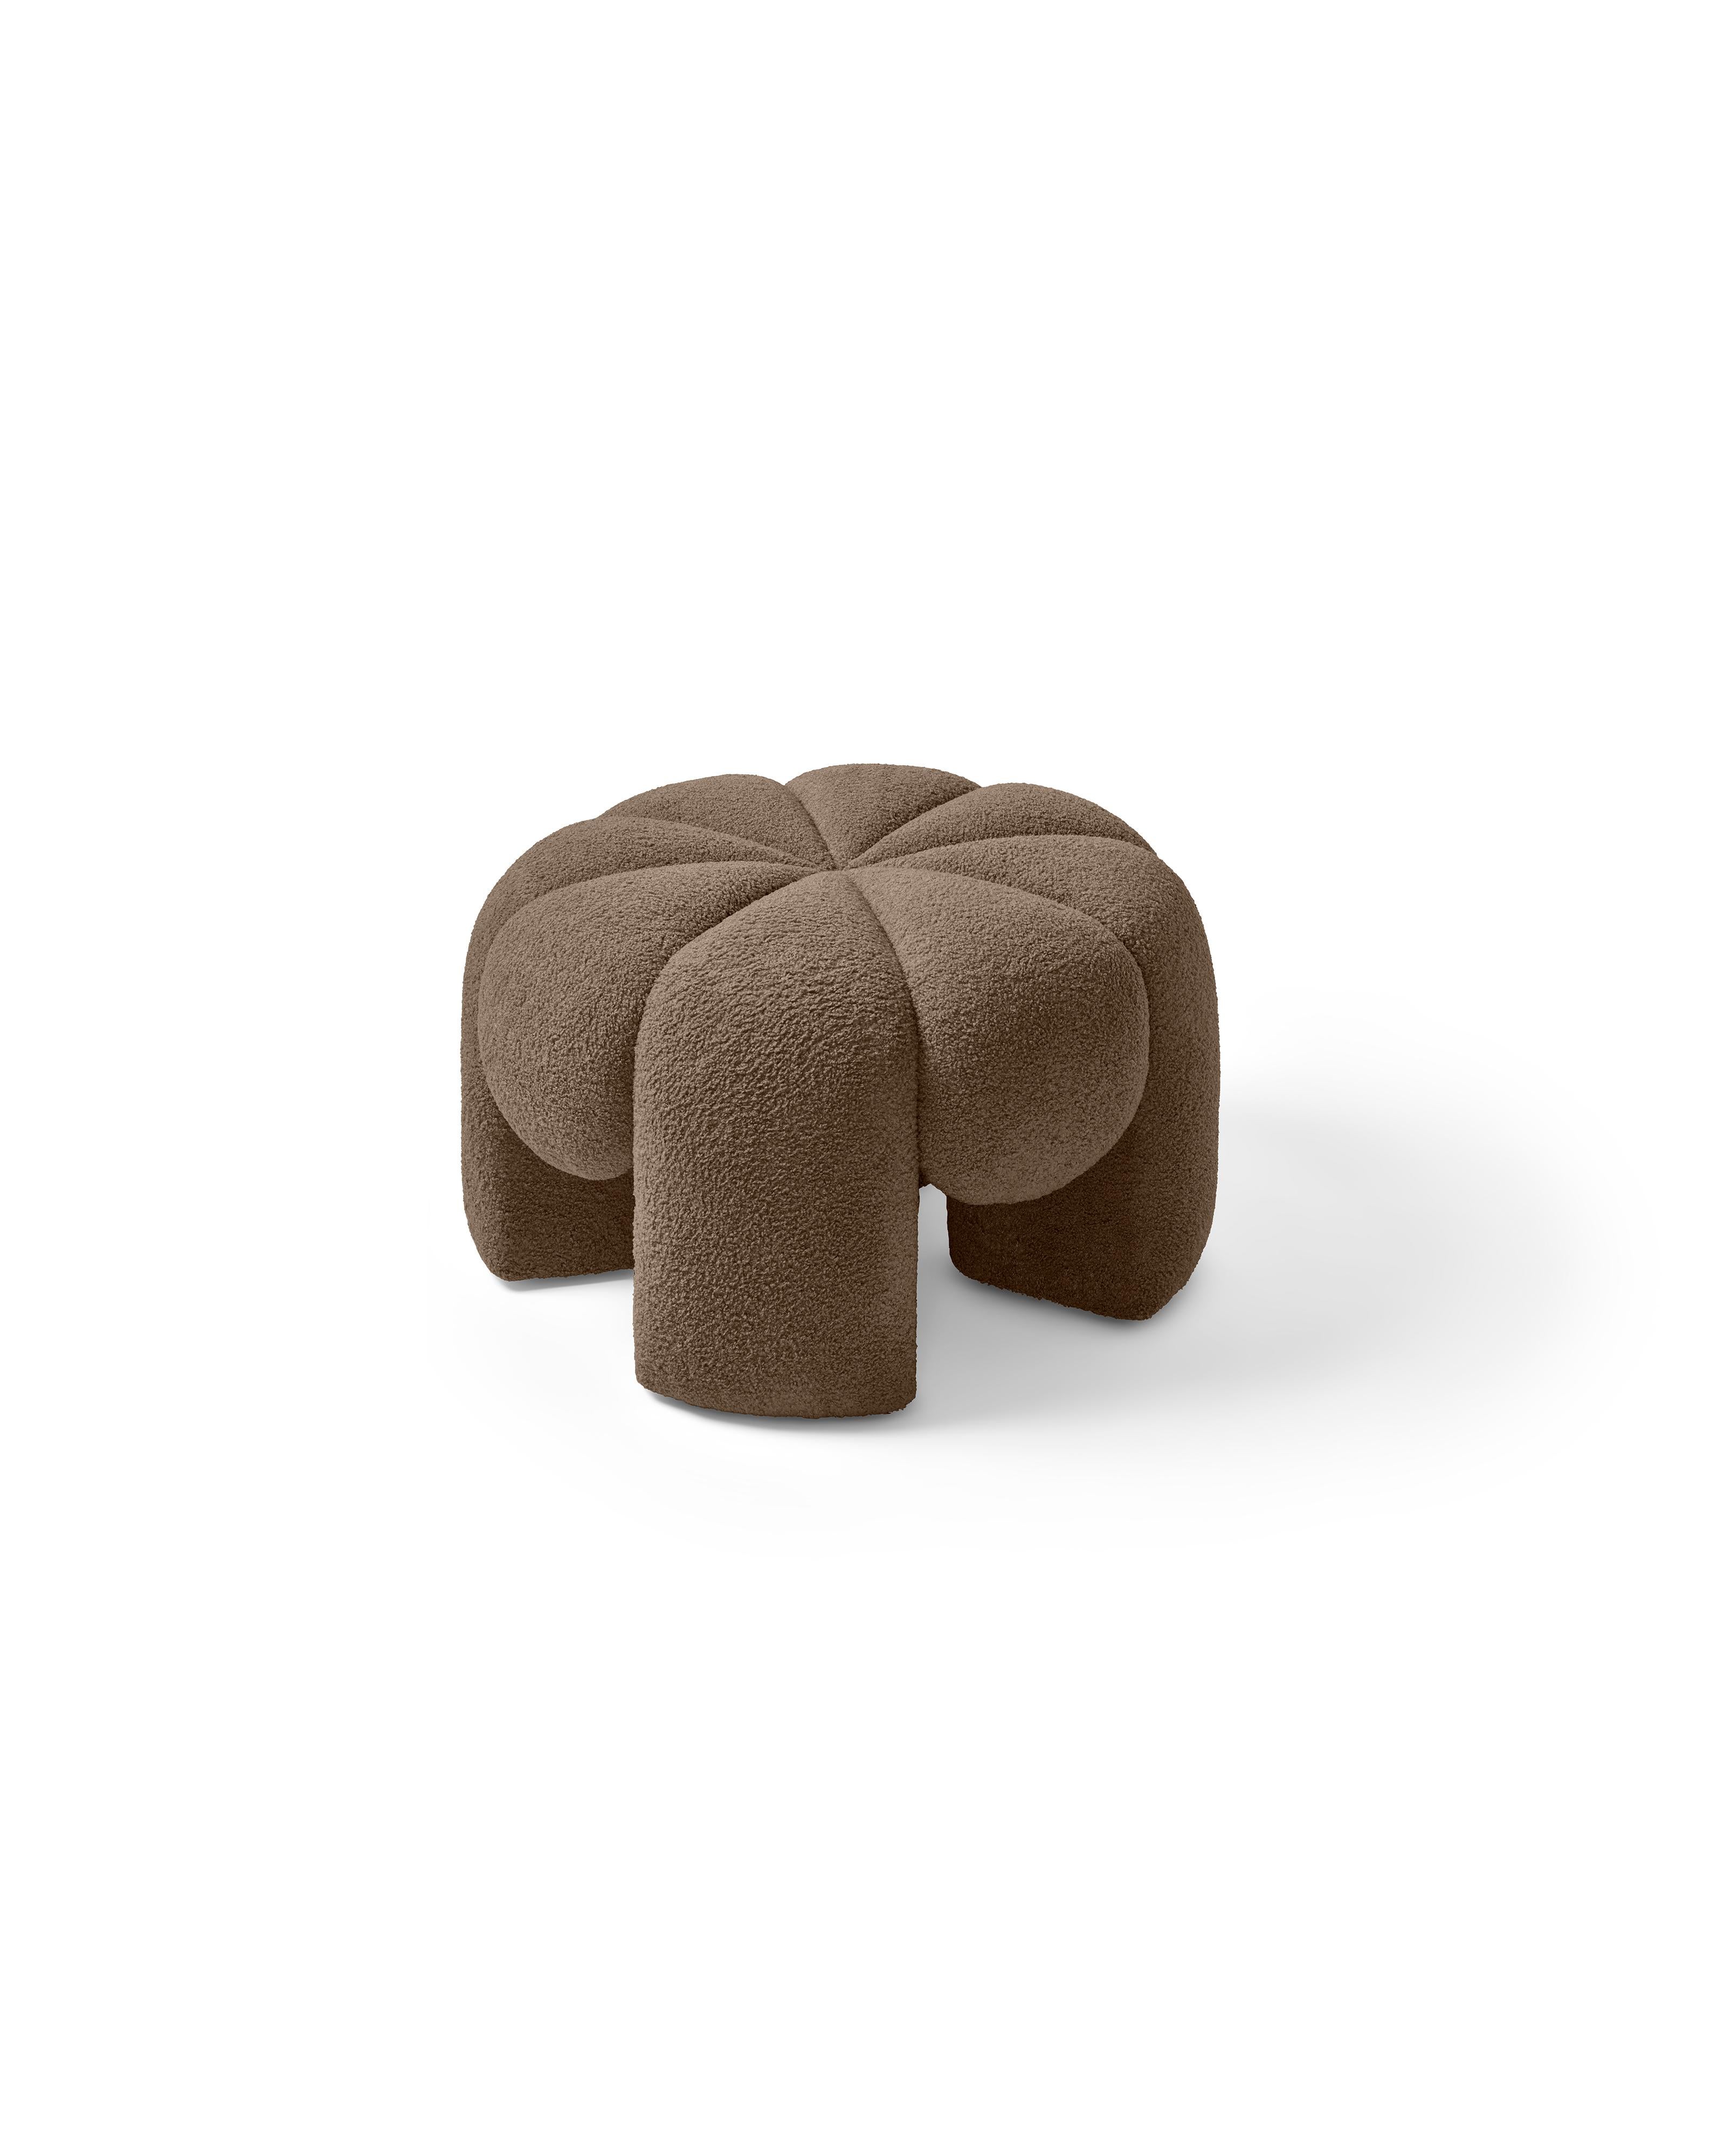 fluffy puffy 'Big Marshmallow' pouf For Sale 8